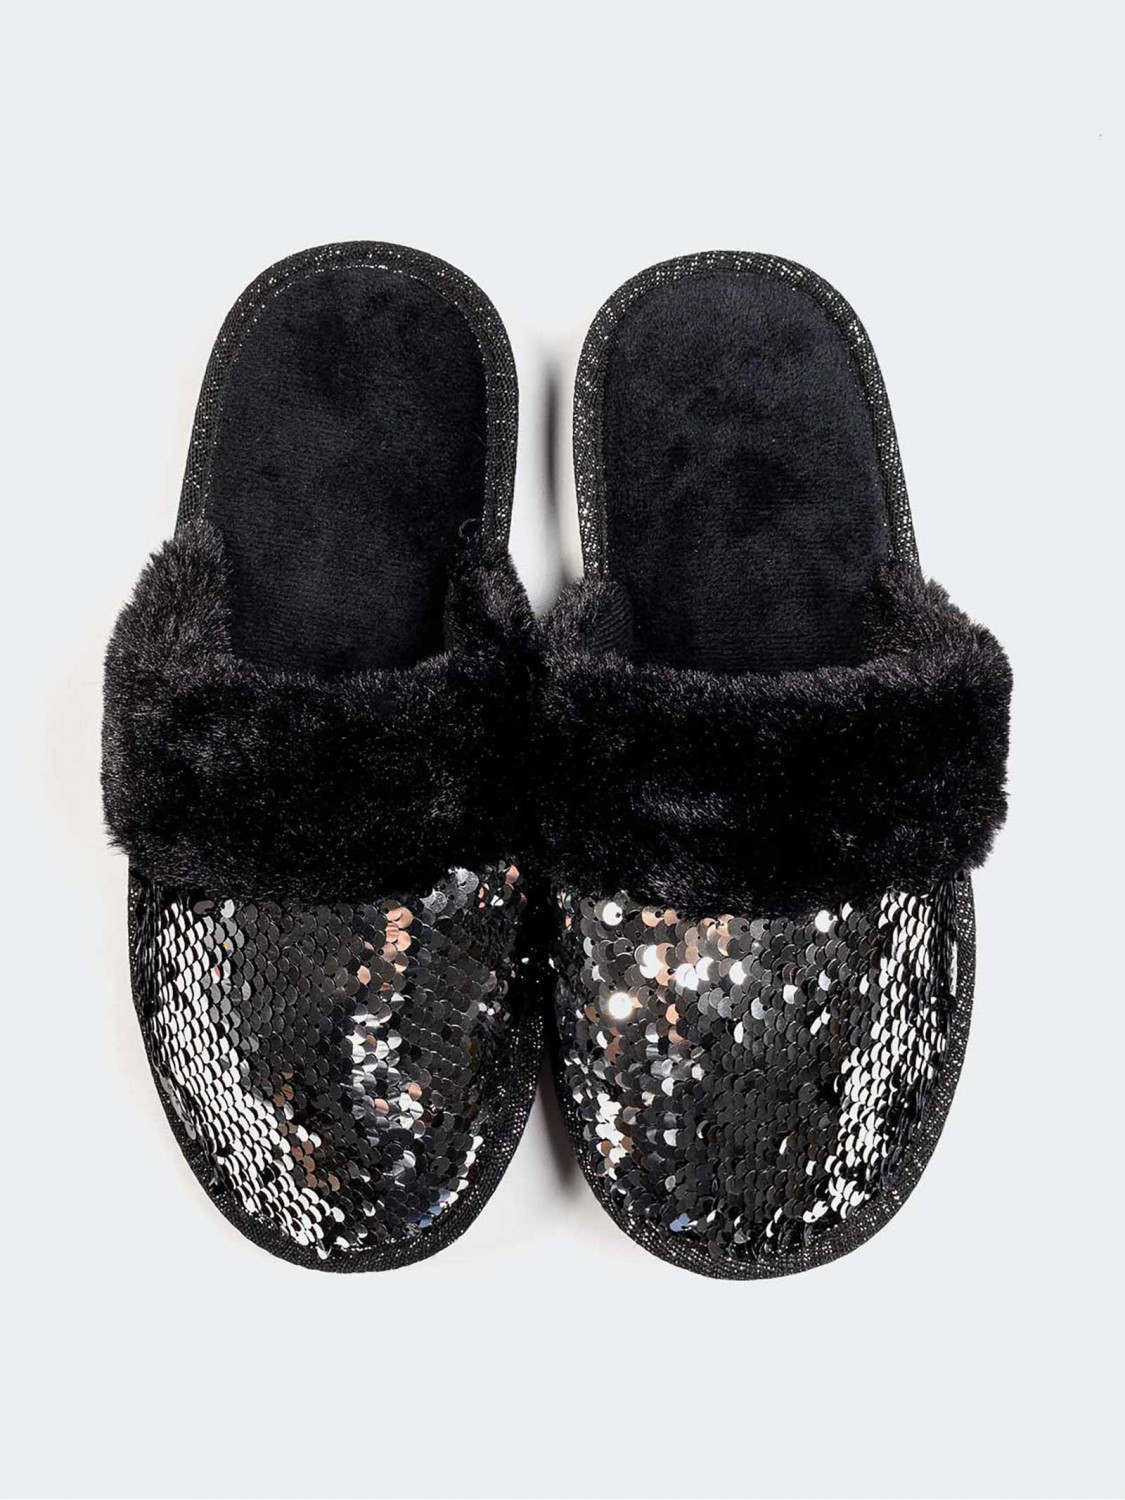 Home Woman's slippers with Paillettes